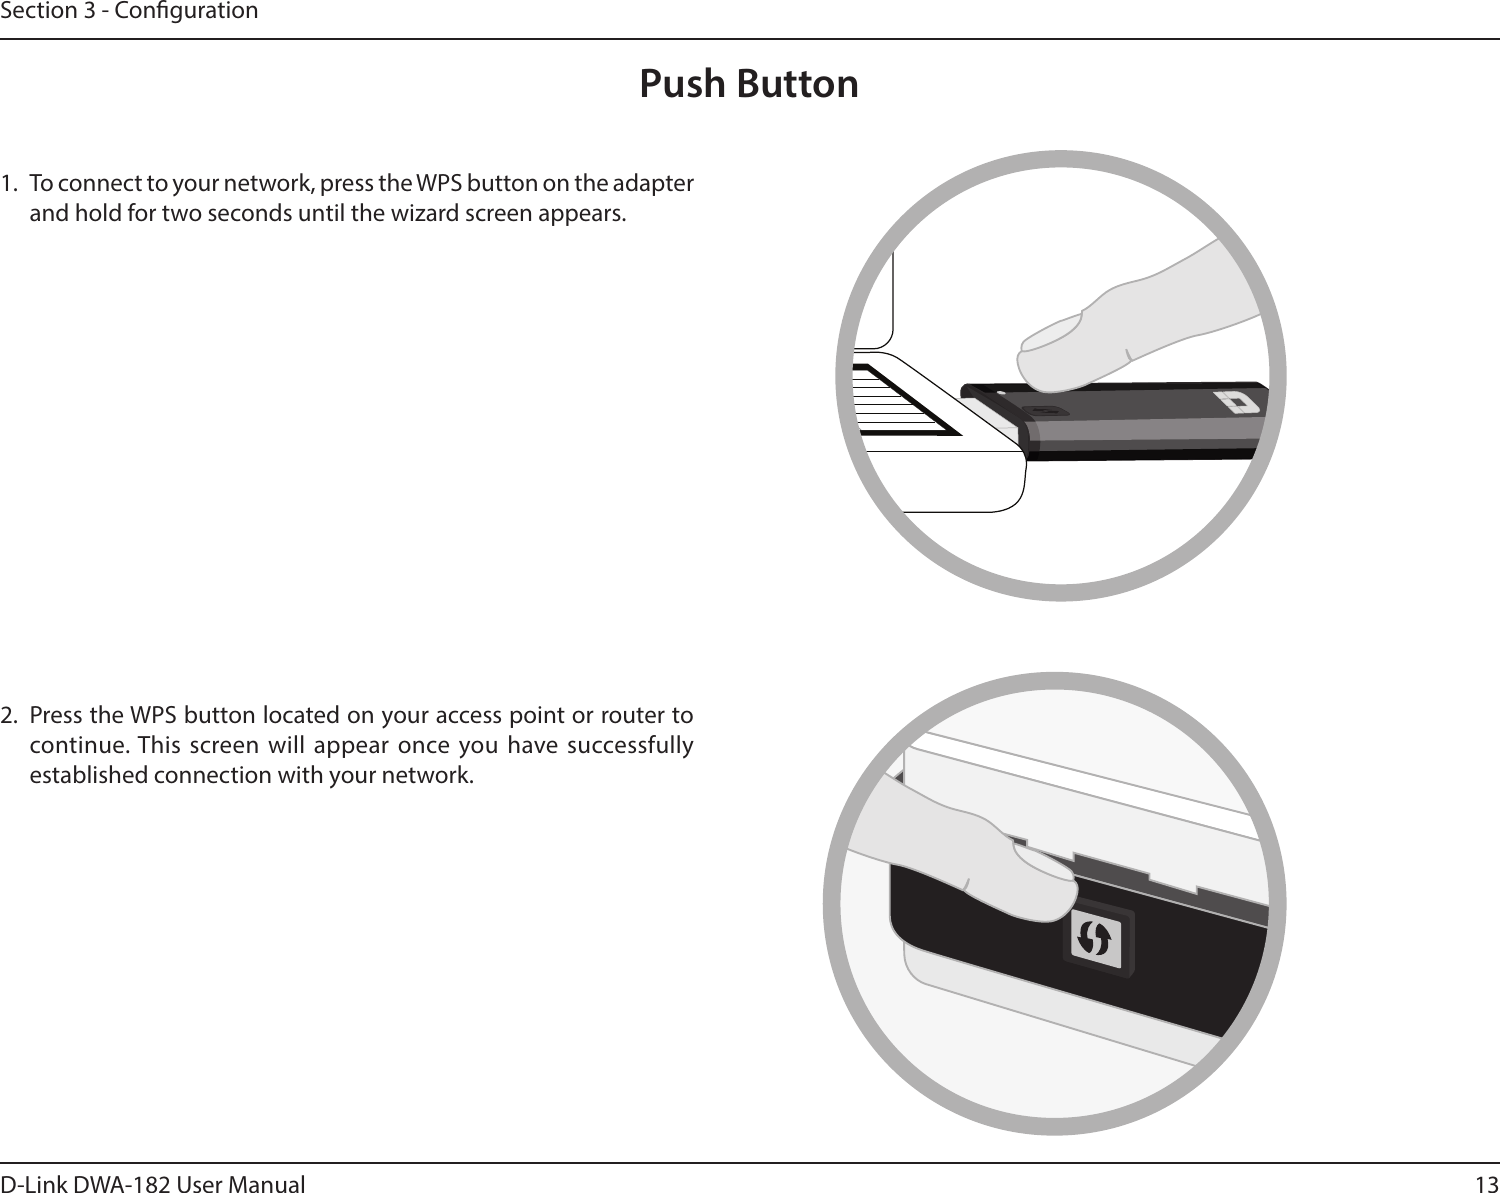 13D-Link DWA-182 User ManualSection 3 - CongurationPush Button1.  To connect to your network, press the WPS button on the adapter and hold for two seconds until the wizard screen appears.2.  Press the WPS button located on your access point or router to continue. This screen will appear once you have successfully established connection with your network. 